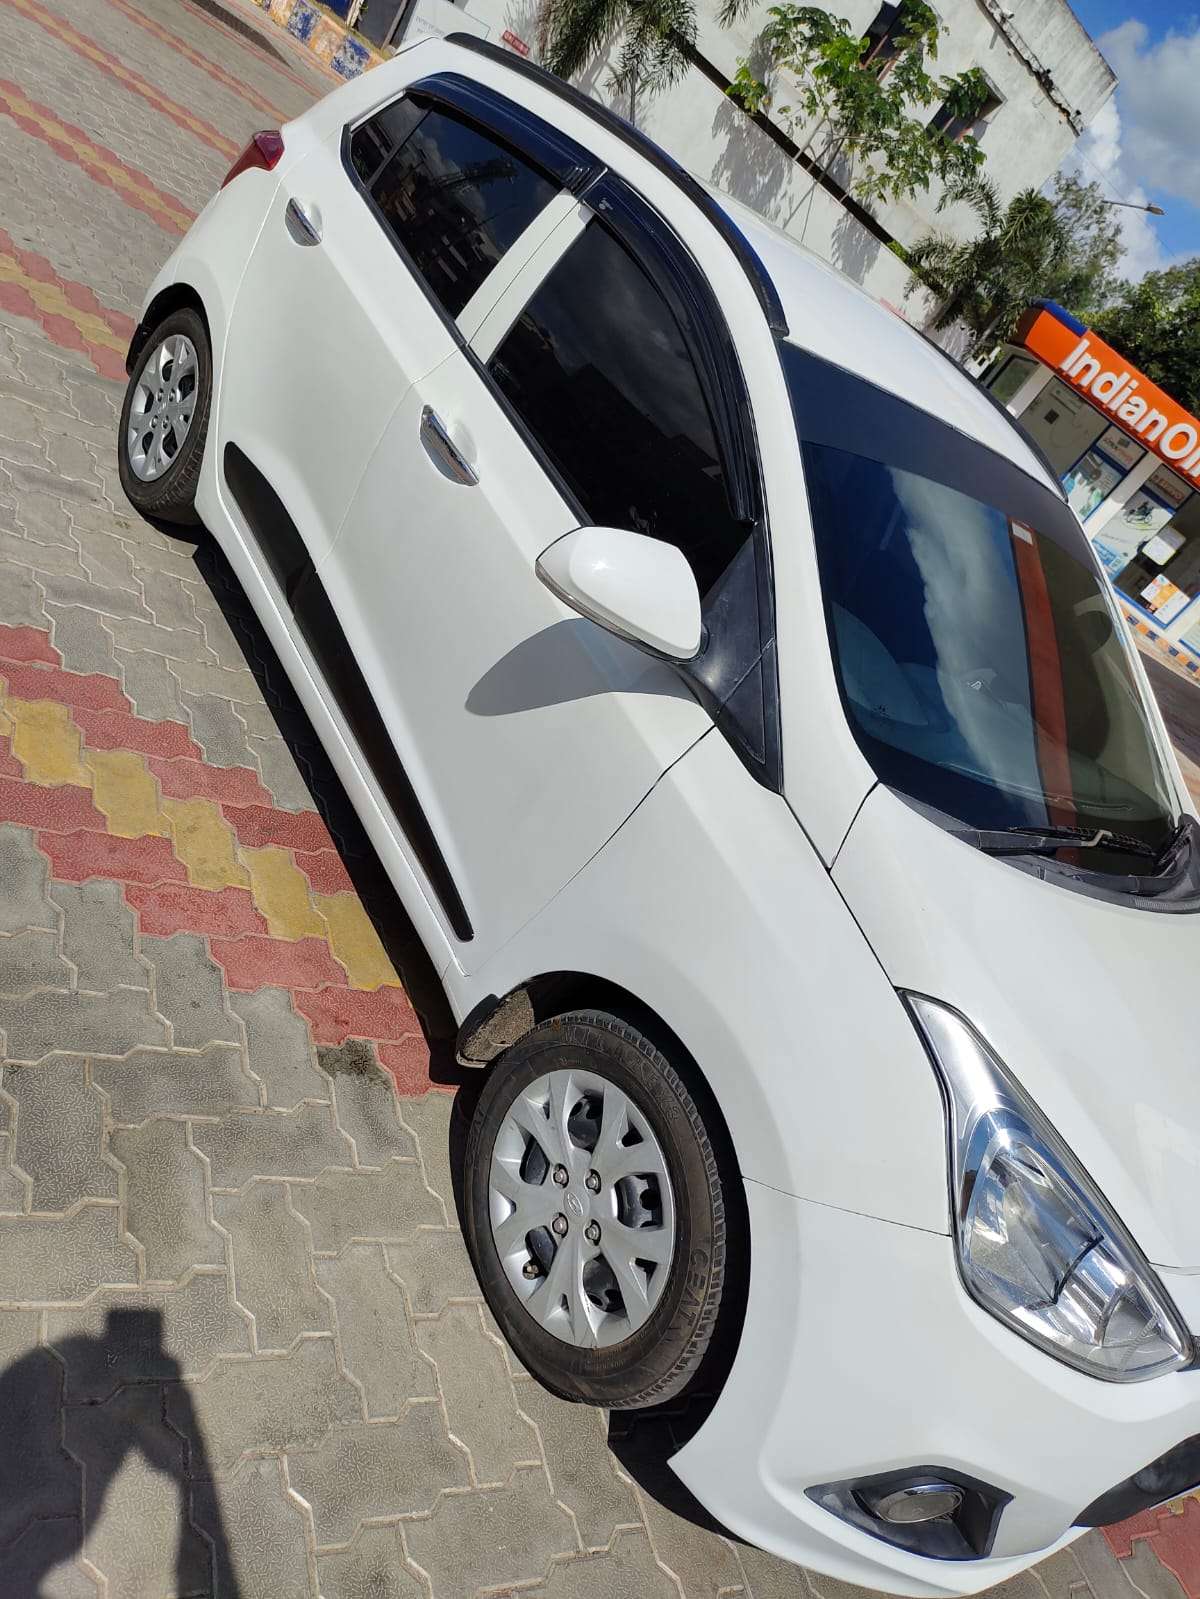 1582-for-sale-Hyundai-Grand-i10-Diesel-Second-Owner-2013-TN-registered-rs-350000